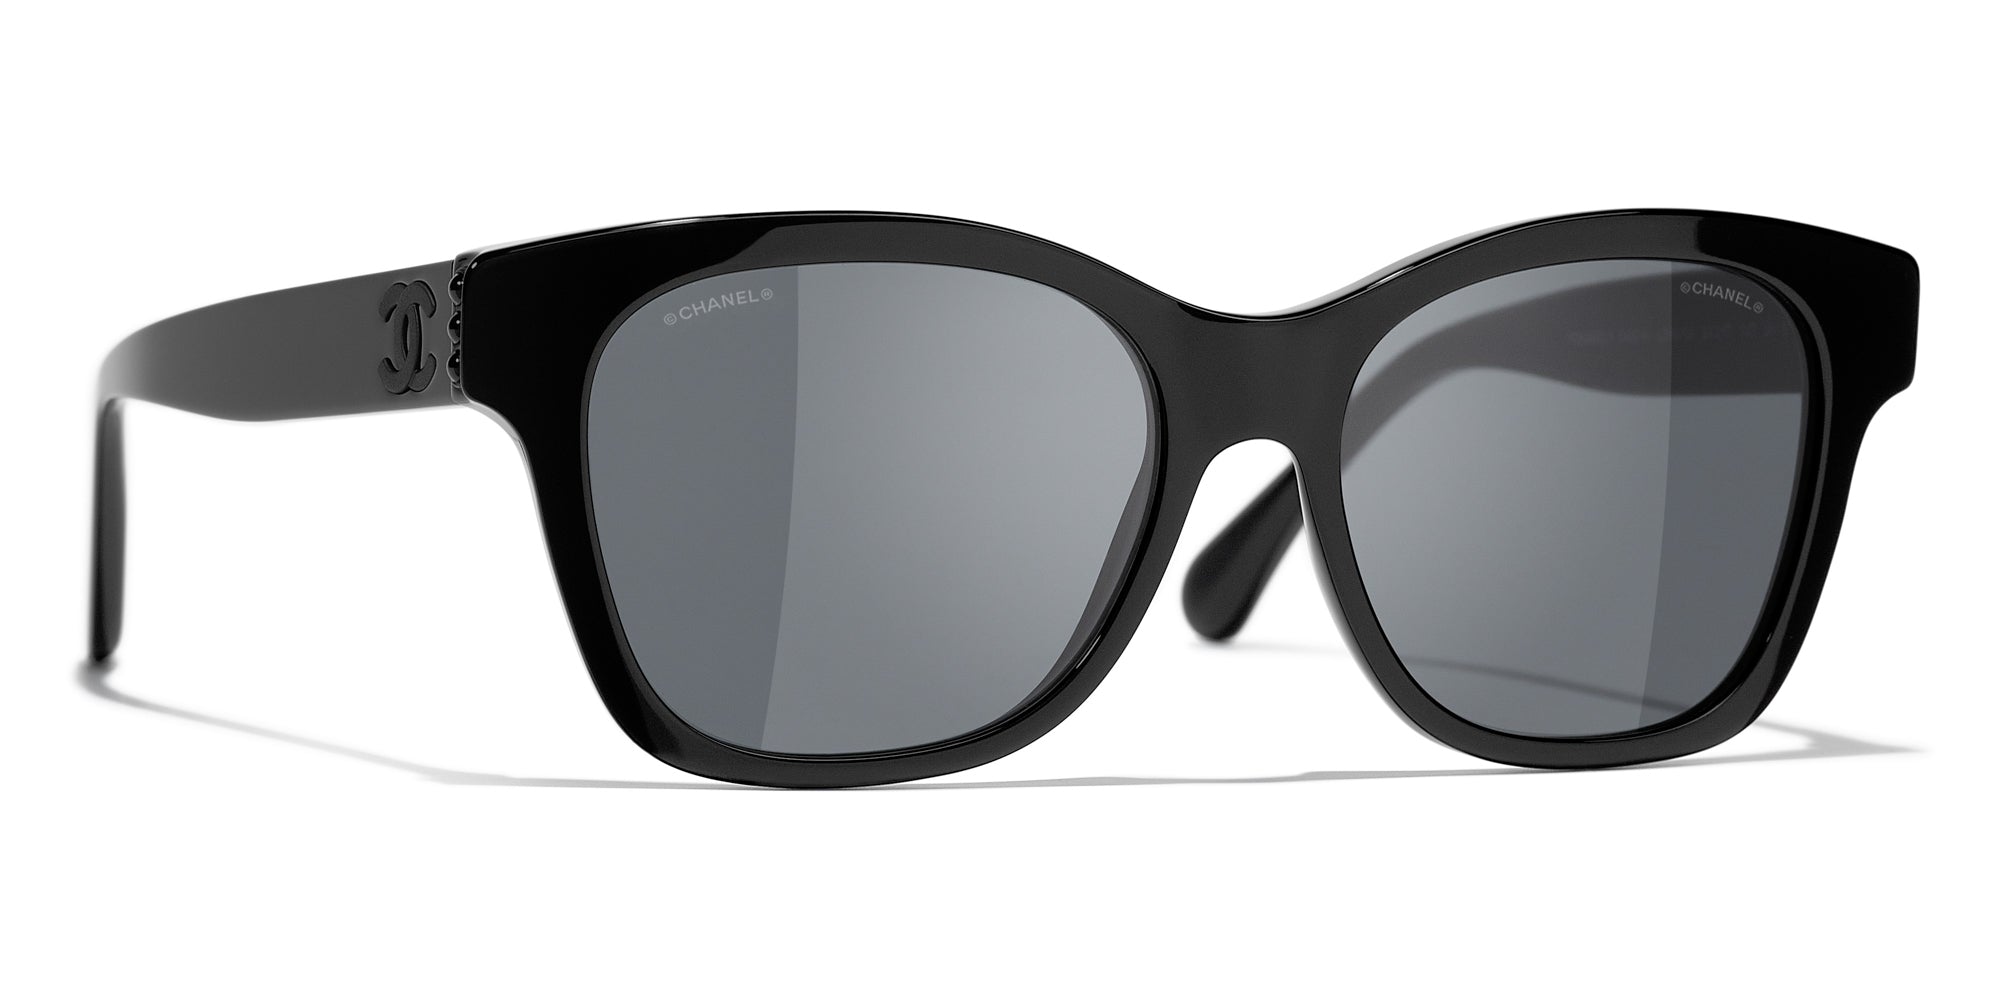 Ray-Ban Sunglasses for men and women